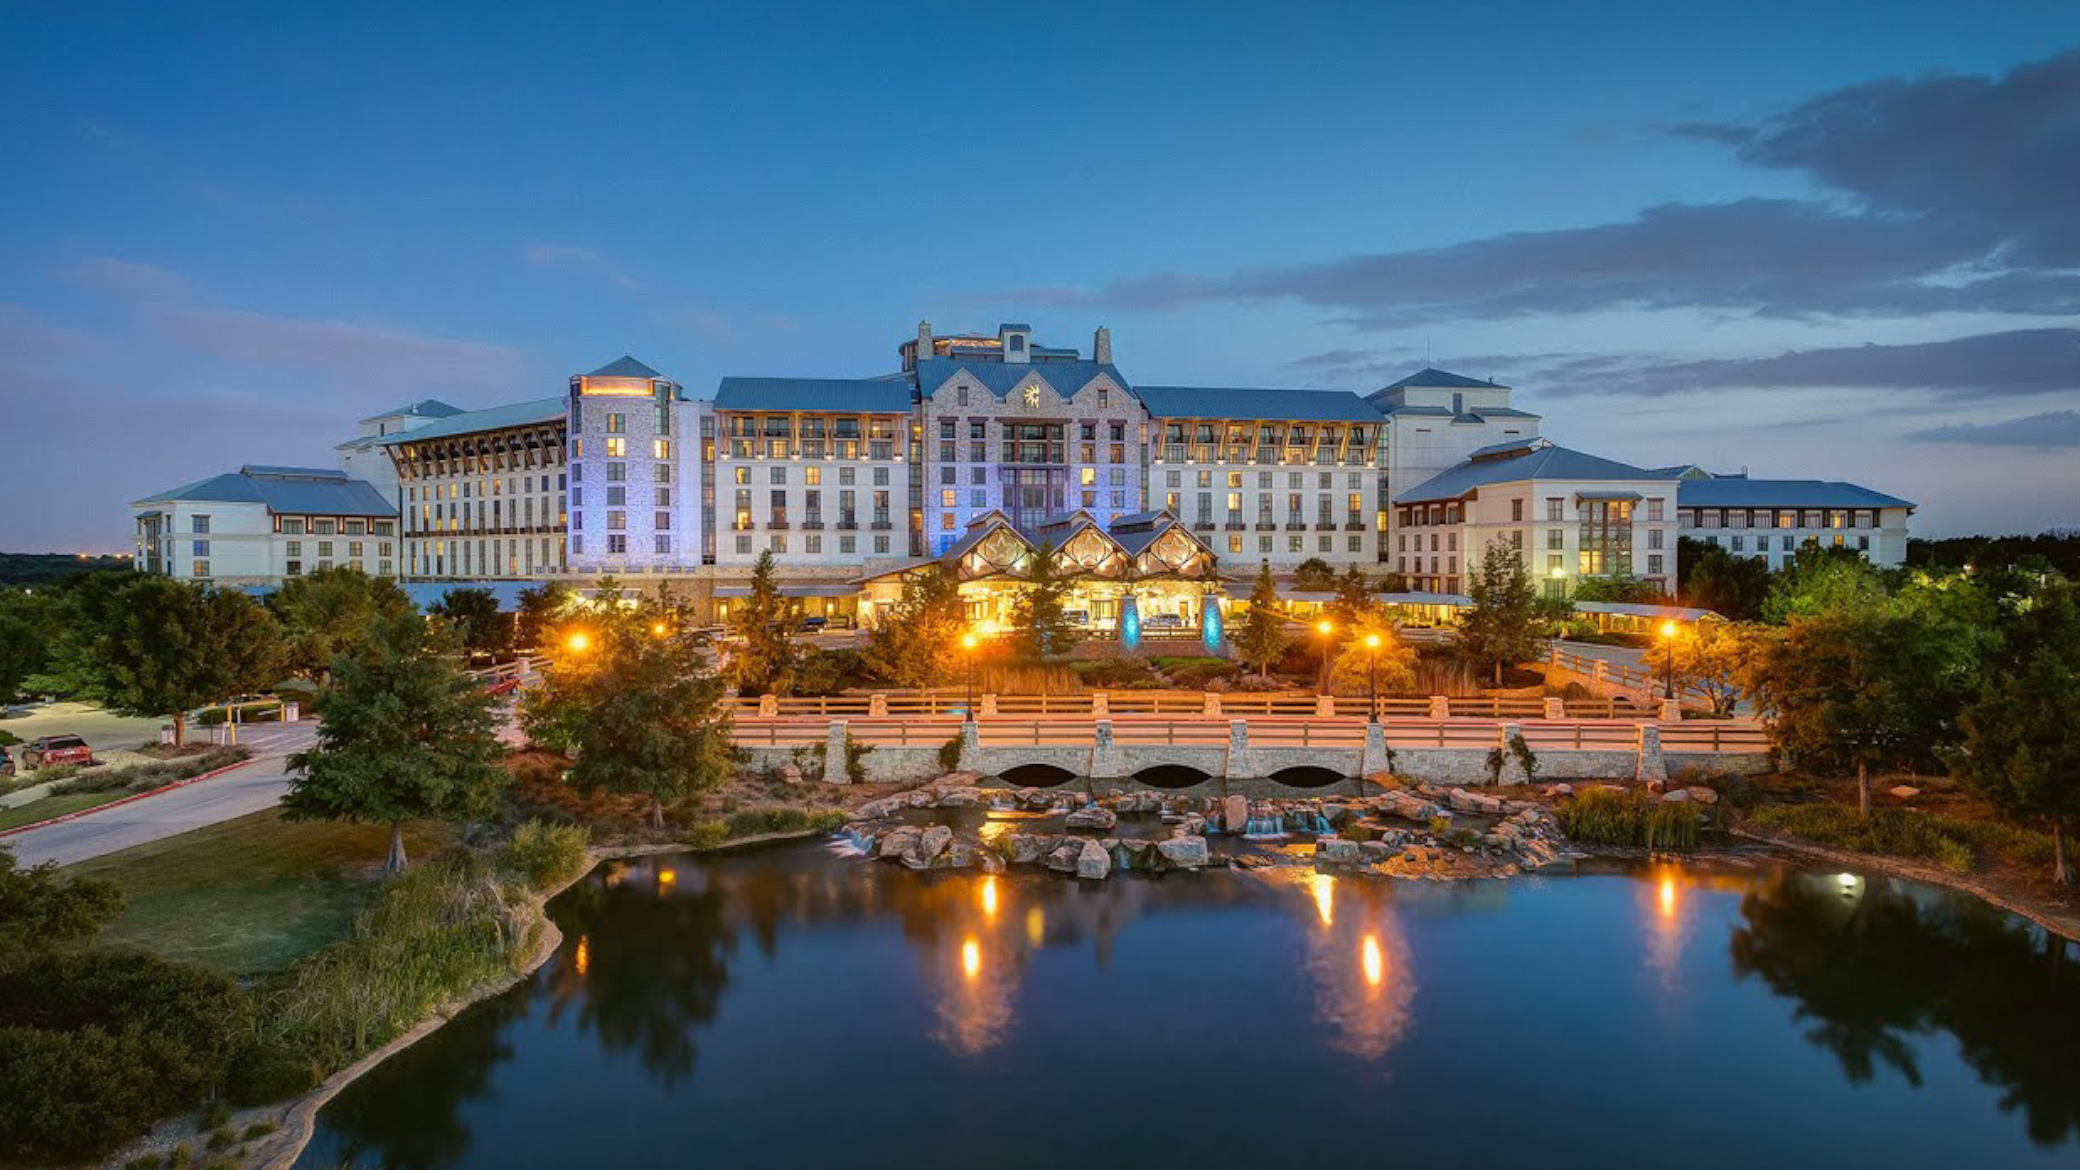 The Gaylord Texan Hotel and Resort provides world-class amenities and over 1,800 rooms along with hundreds of thousands of square feet in convention space.